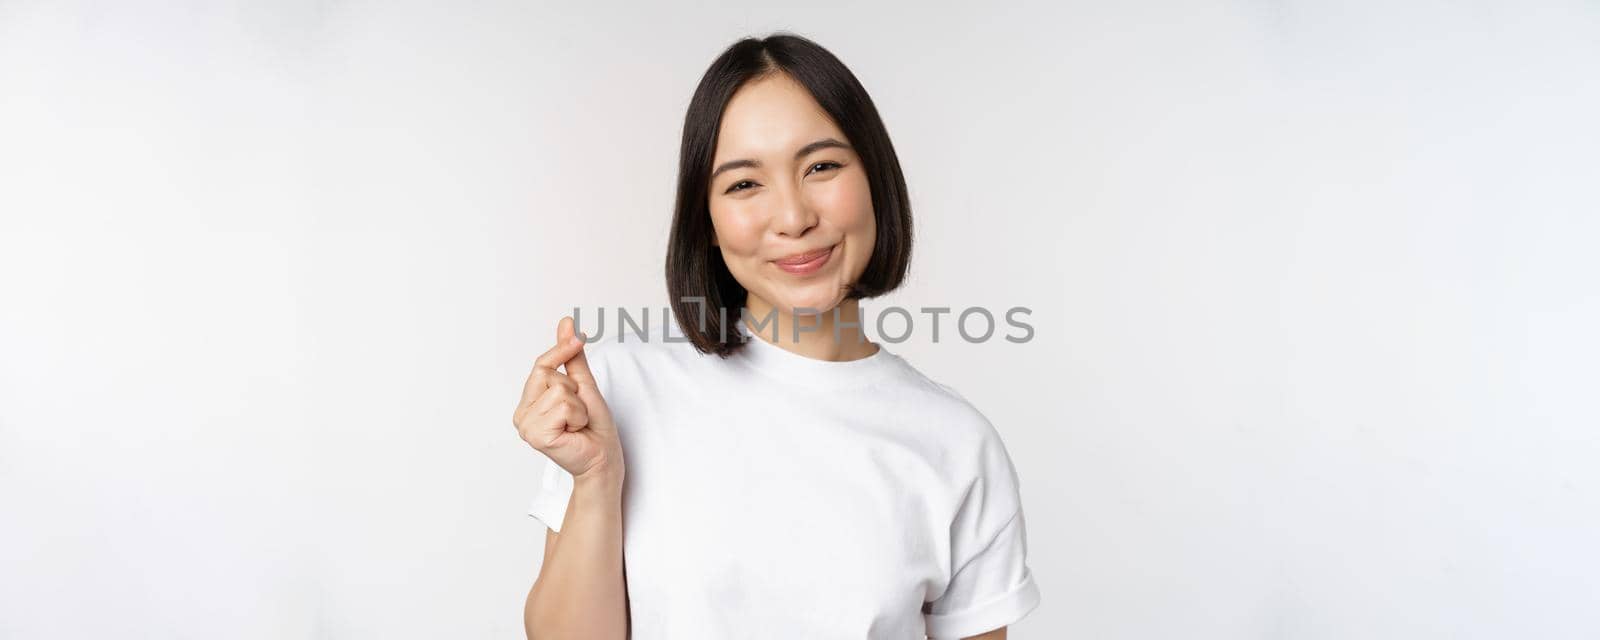 Beautiful asian woman smiling, showing finger hearts gesture, wearing tshirt, standing against white background.